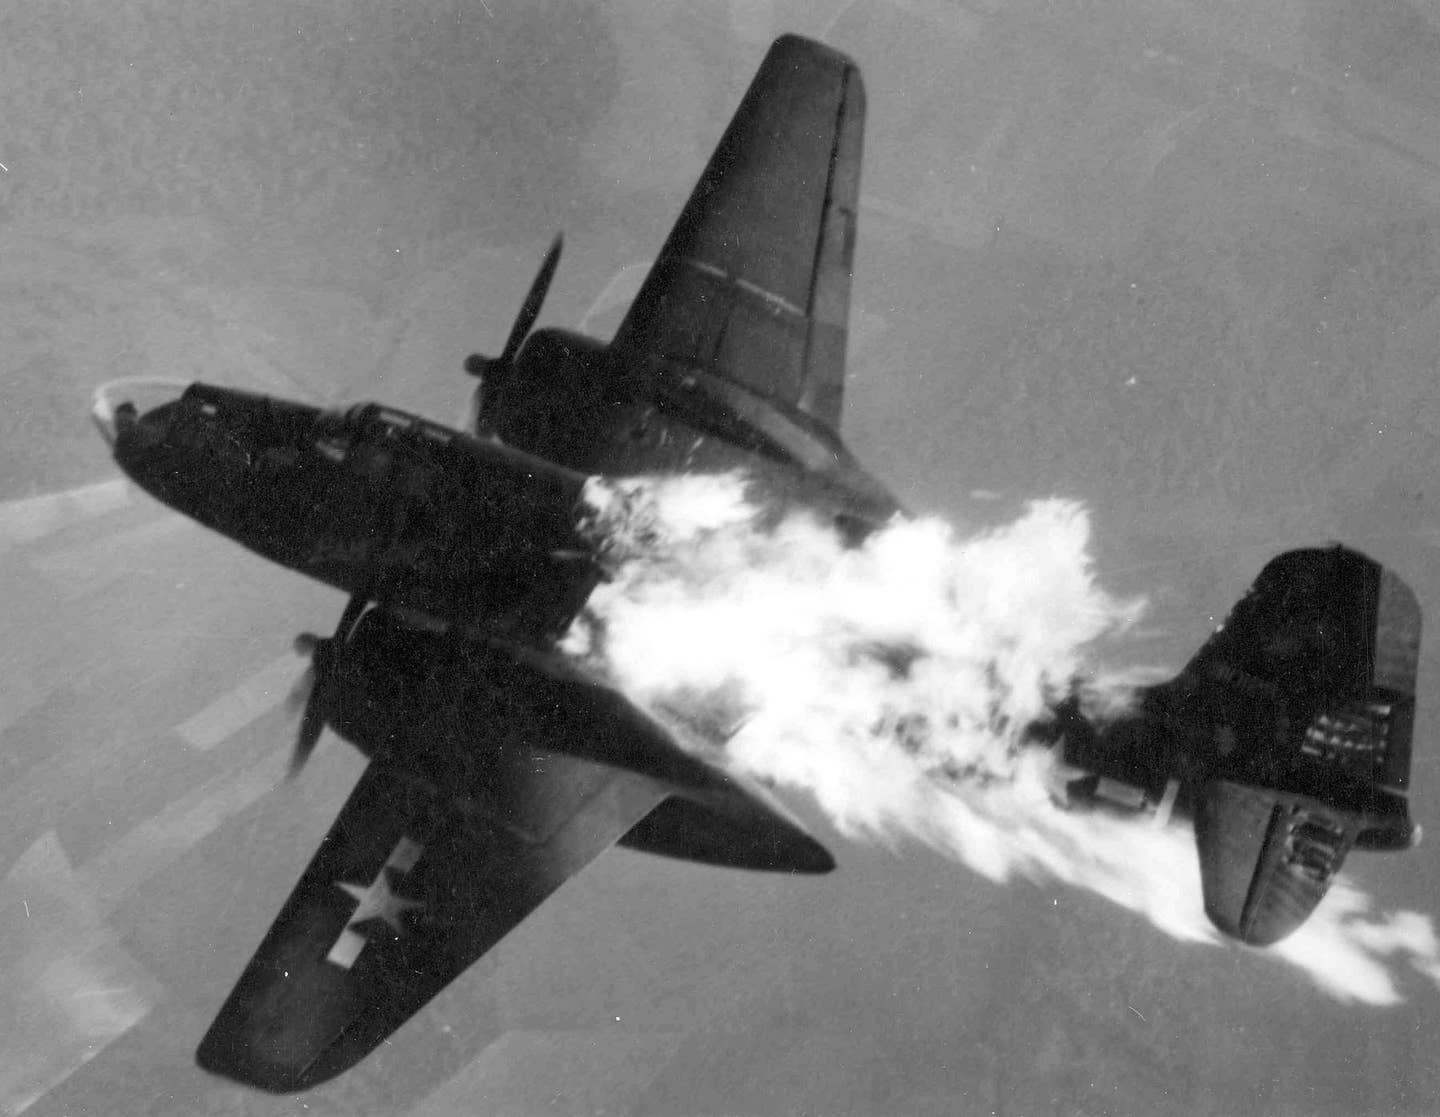 Planes hit in the fuel supply and engines often didn't make it back to base, throwing off Navy and Army Air Corps data. (U.S. Air Force)